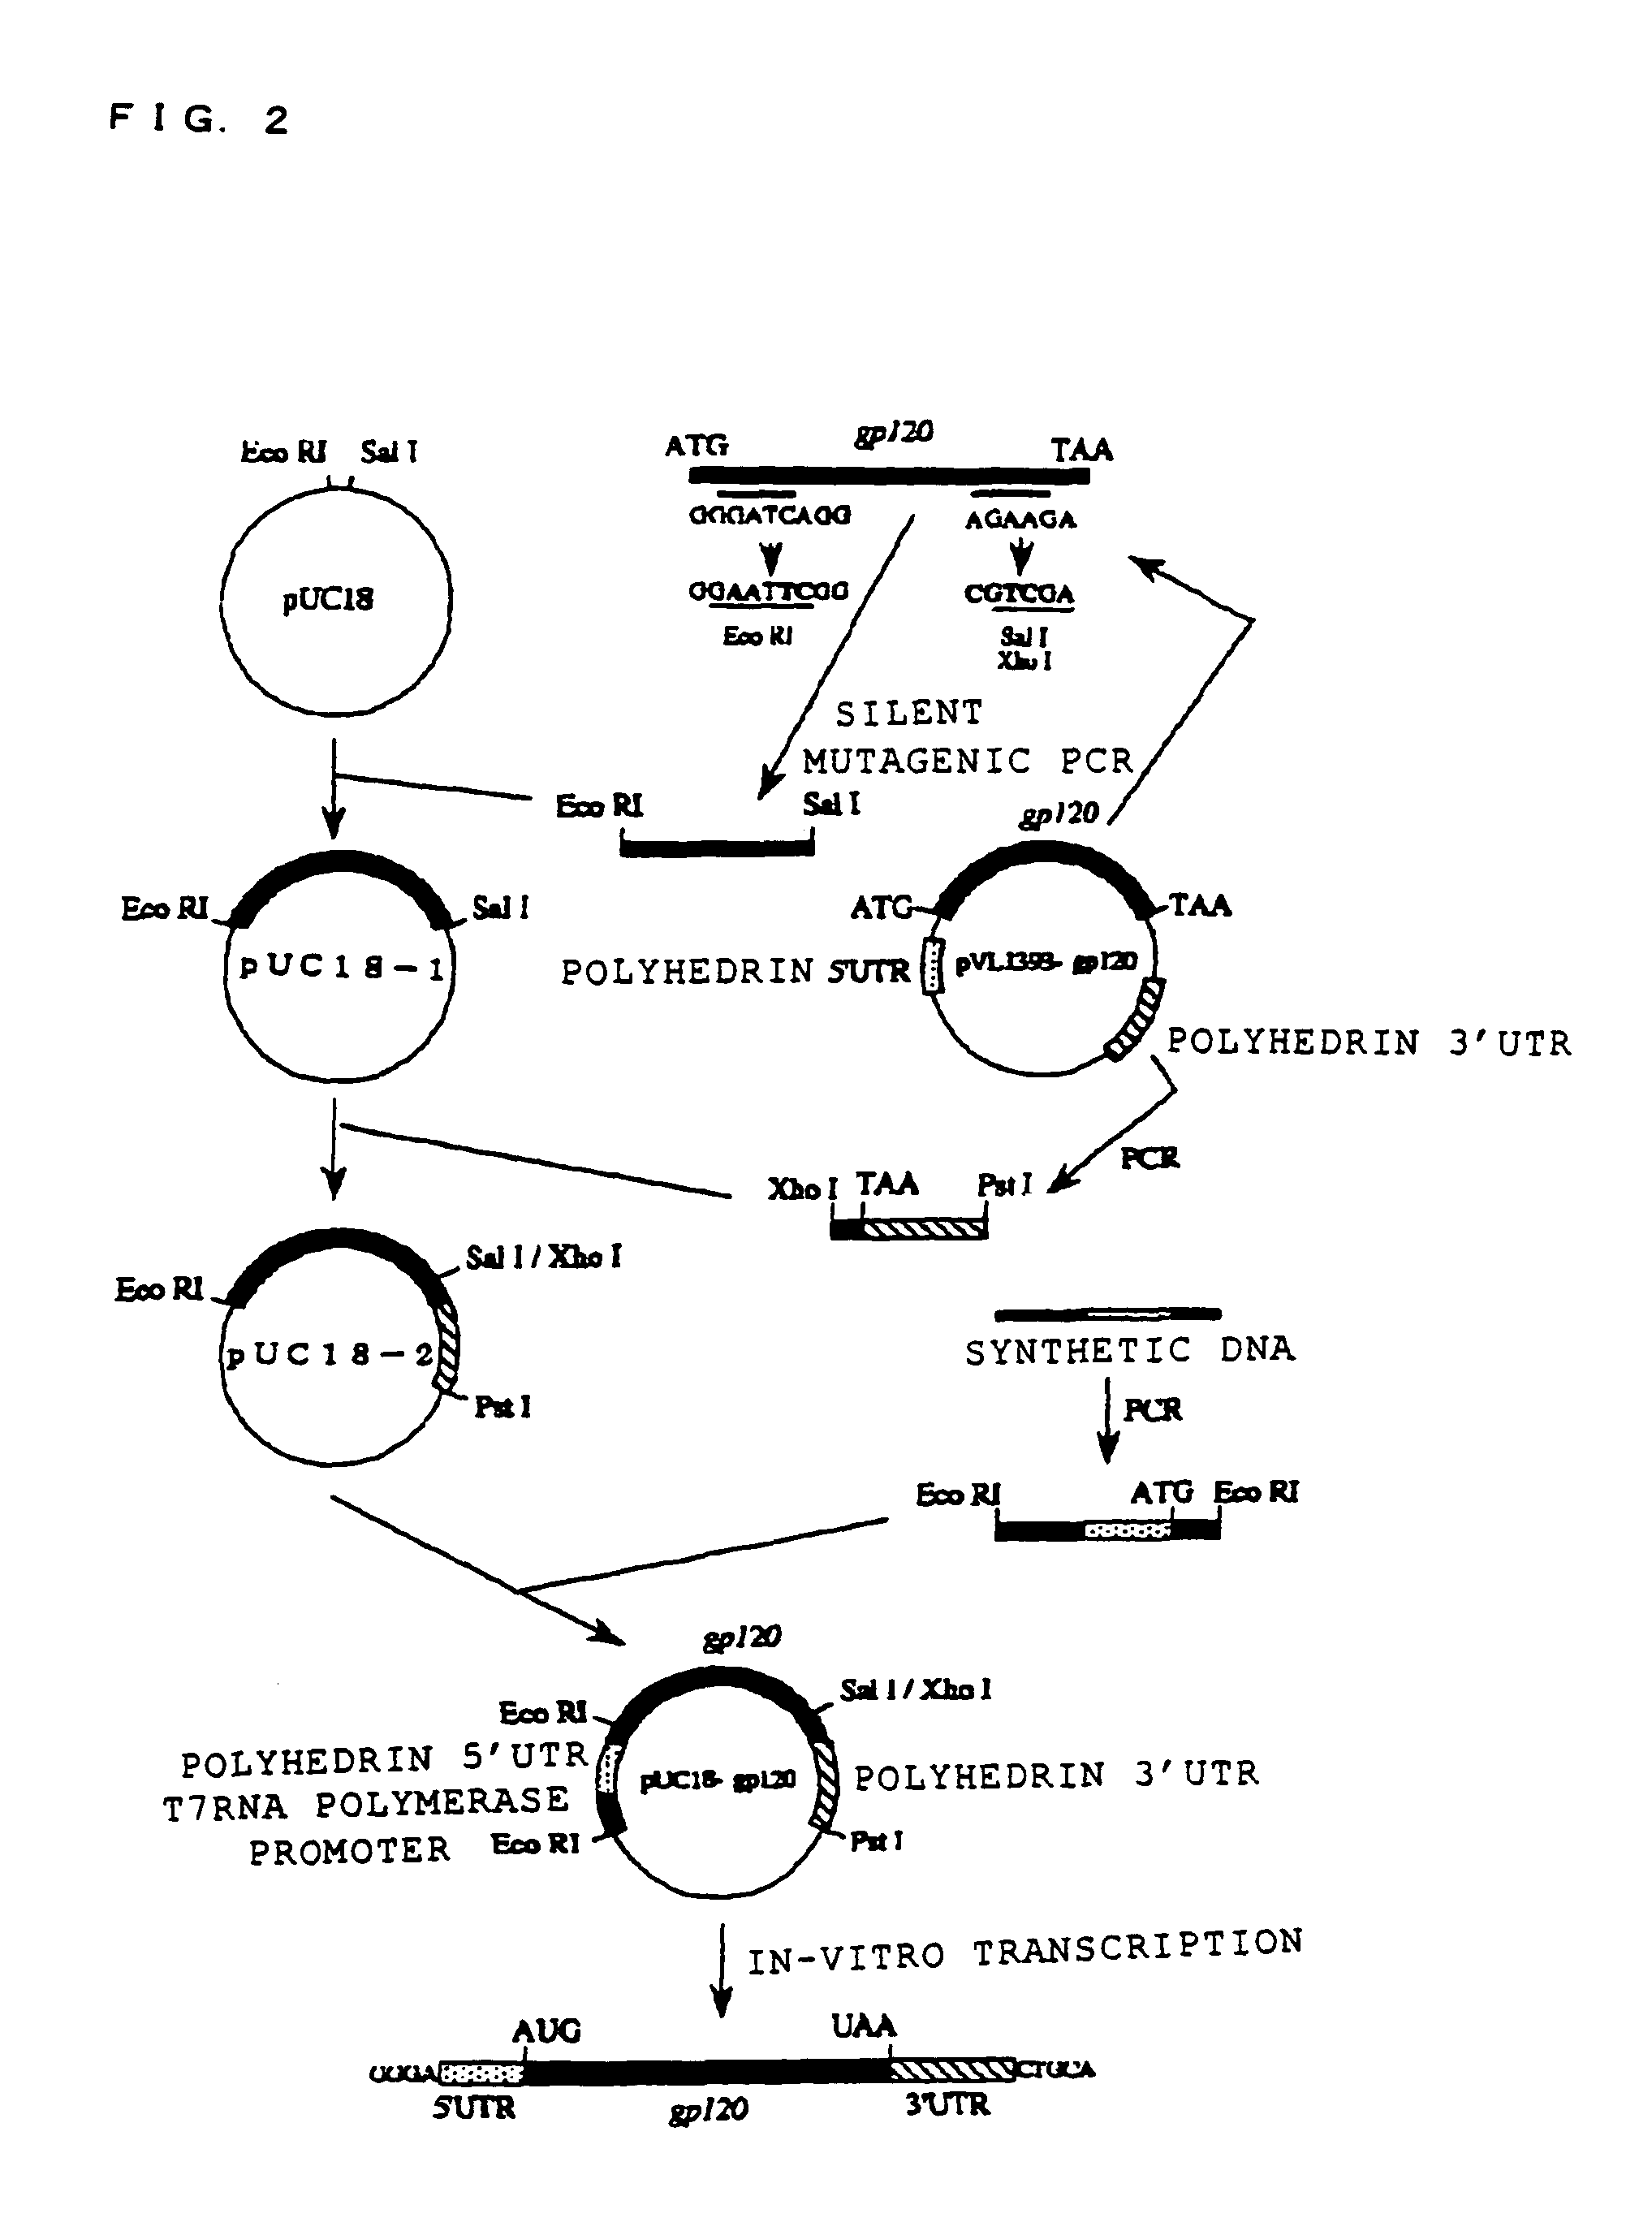 Cell-free extract and glycoprotein synthesis system